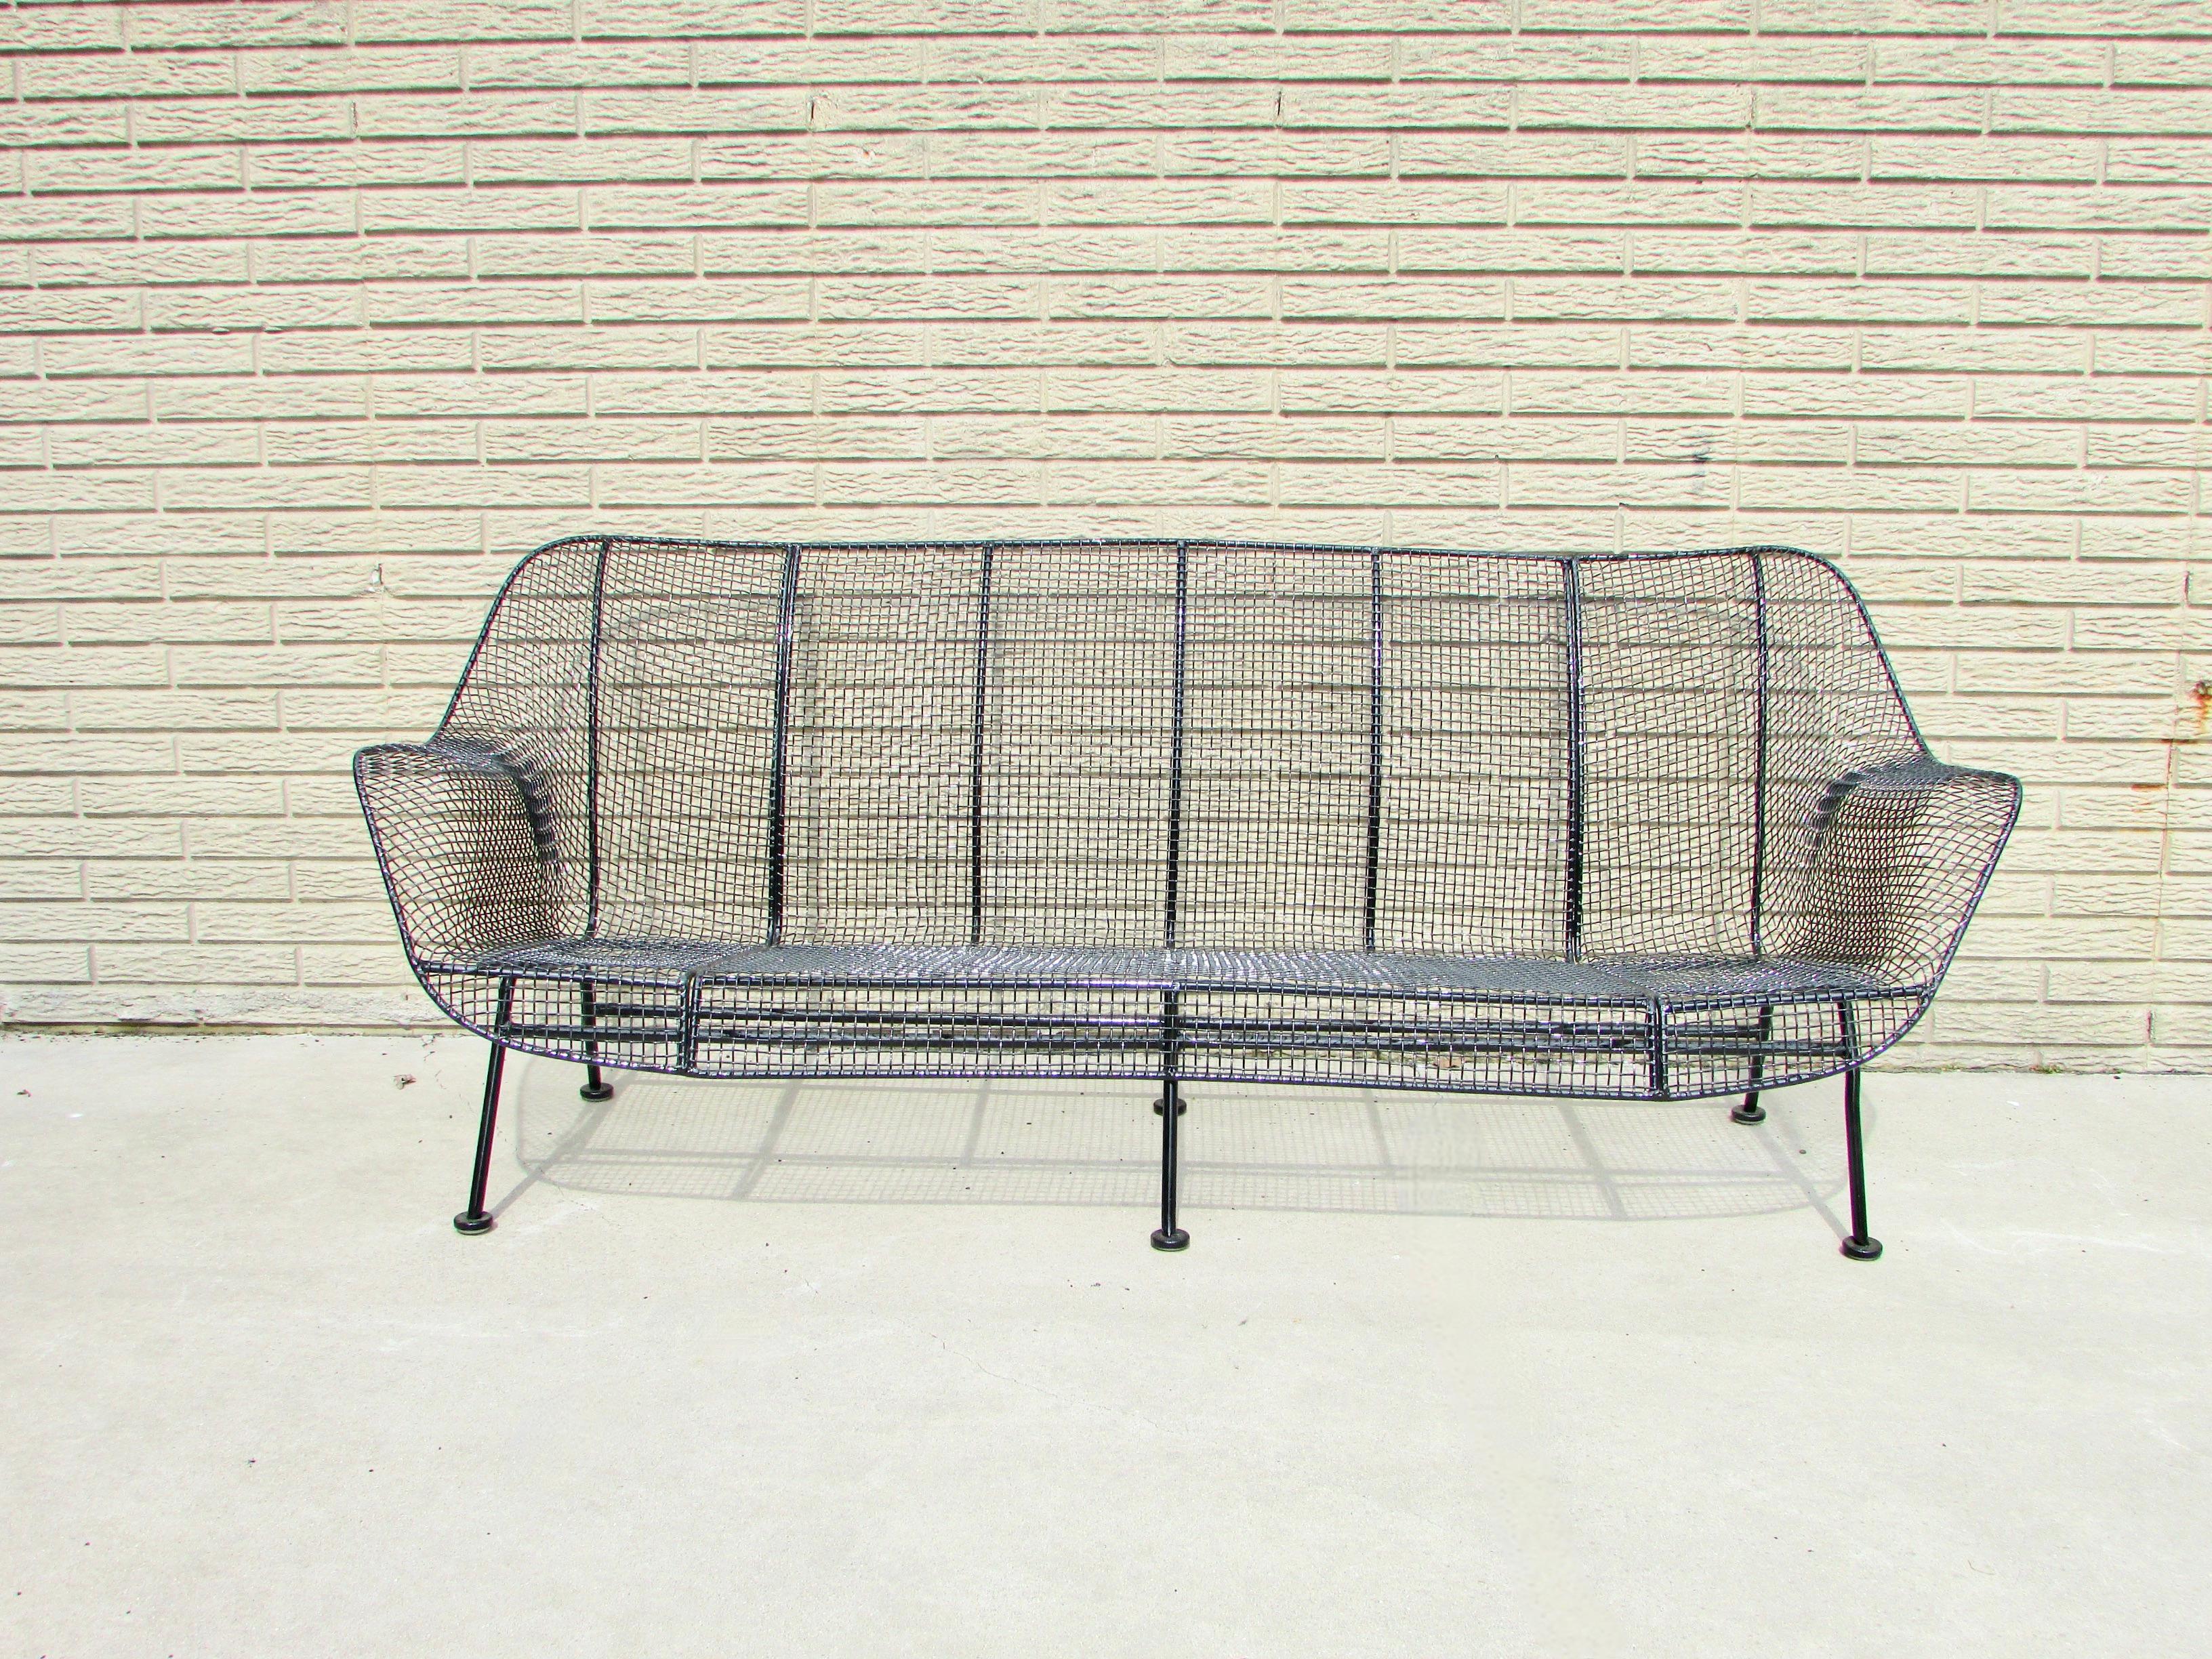 Powder-Coated Completely Restored Woodard Full Size Wrought Iron Couch in Black Powder Coat For Sale